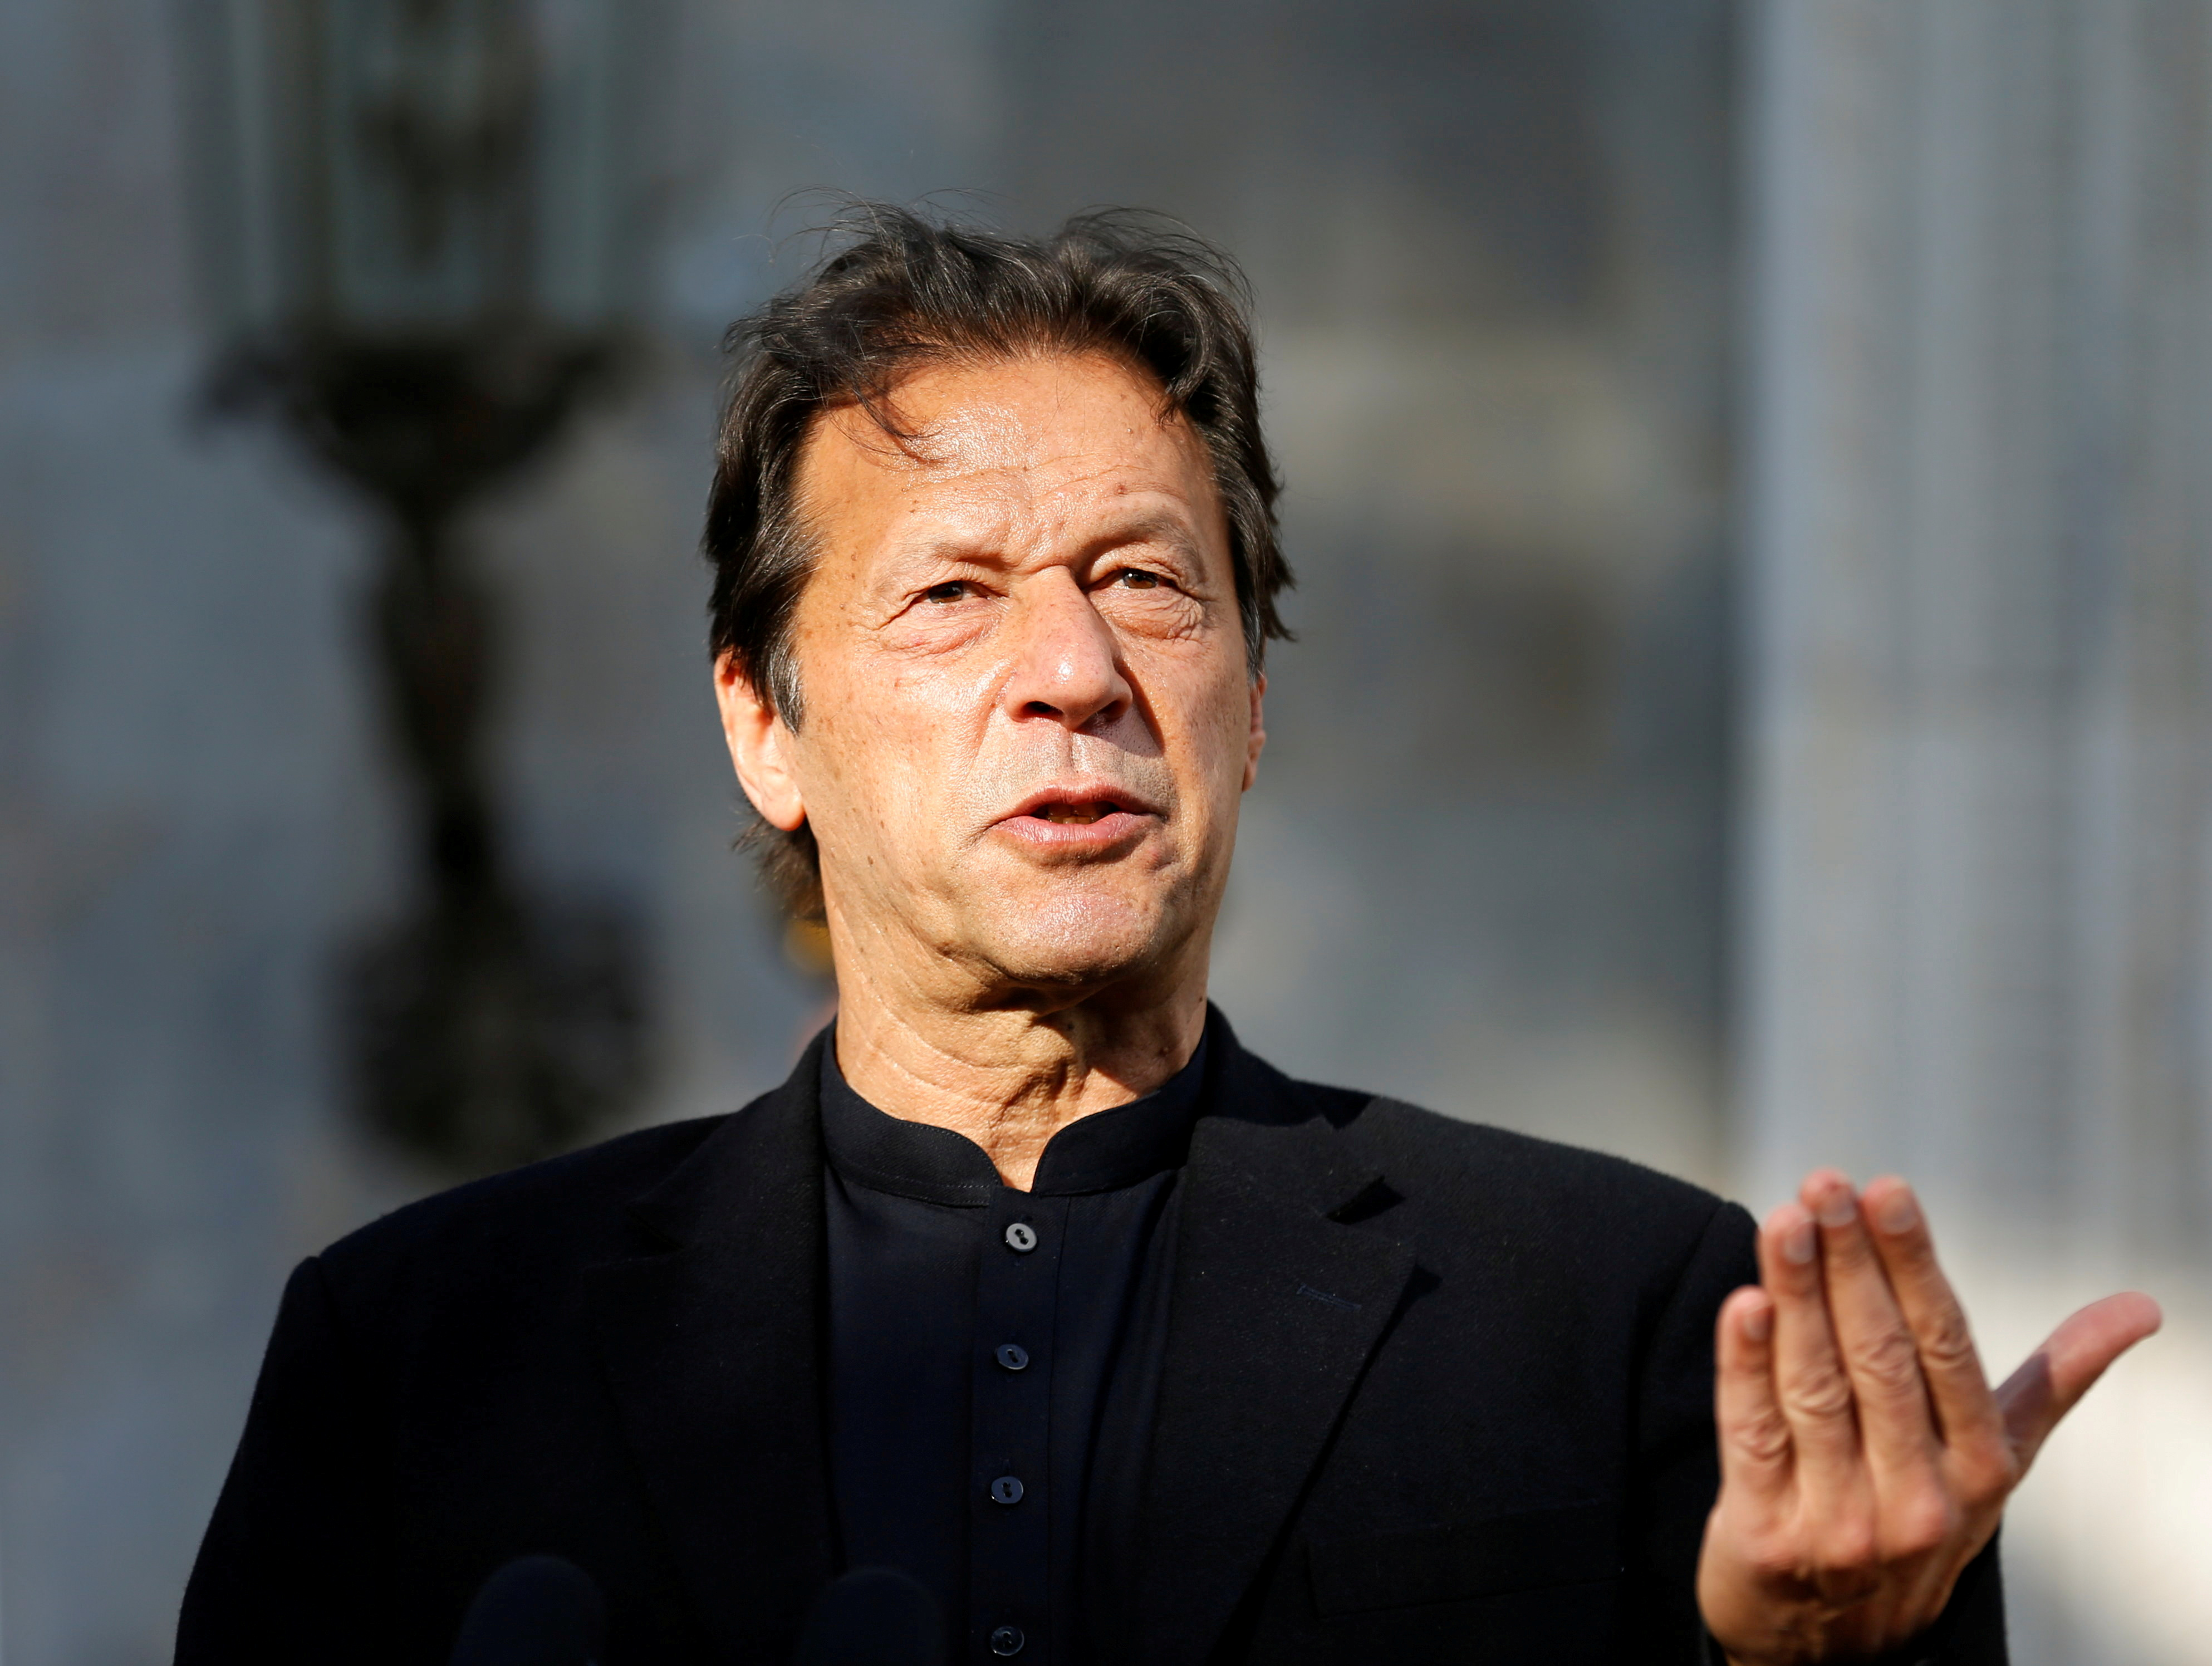 Imran Khan asks Pakistan government to sever ties with India over controversial remarks